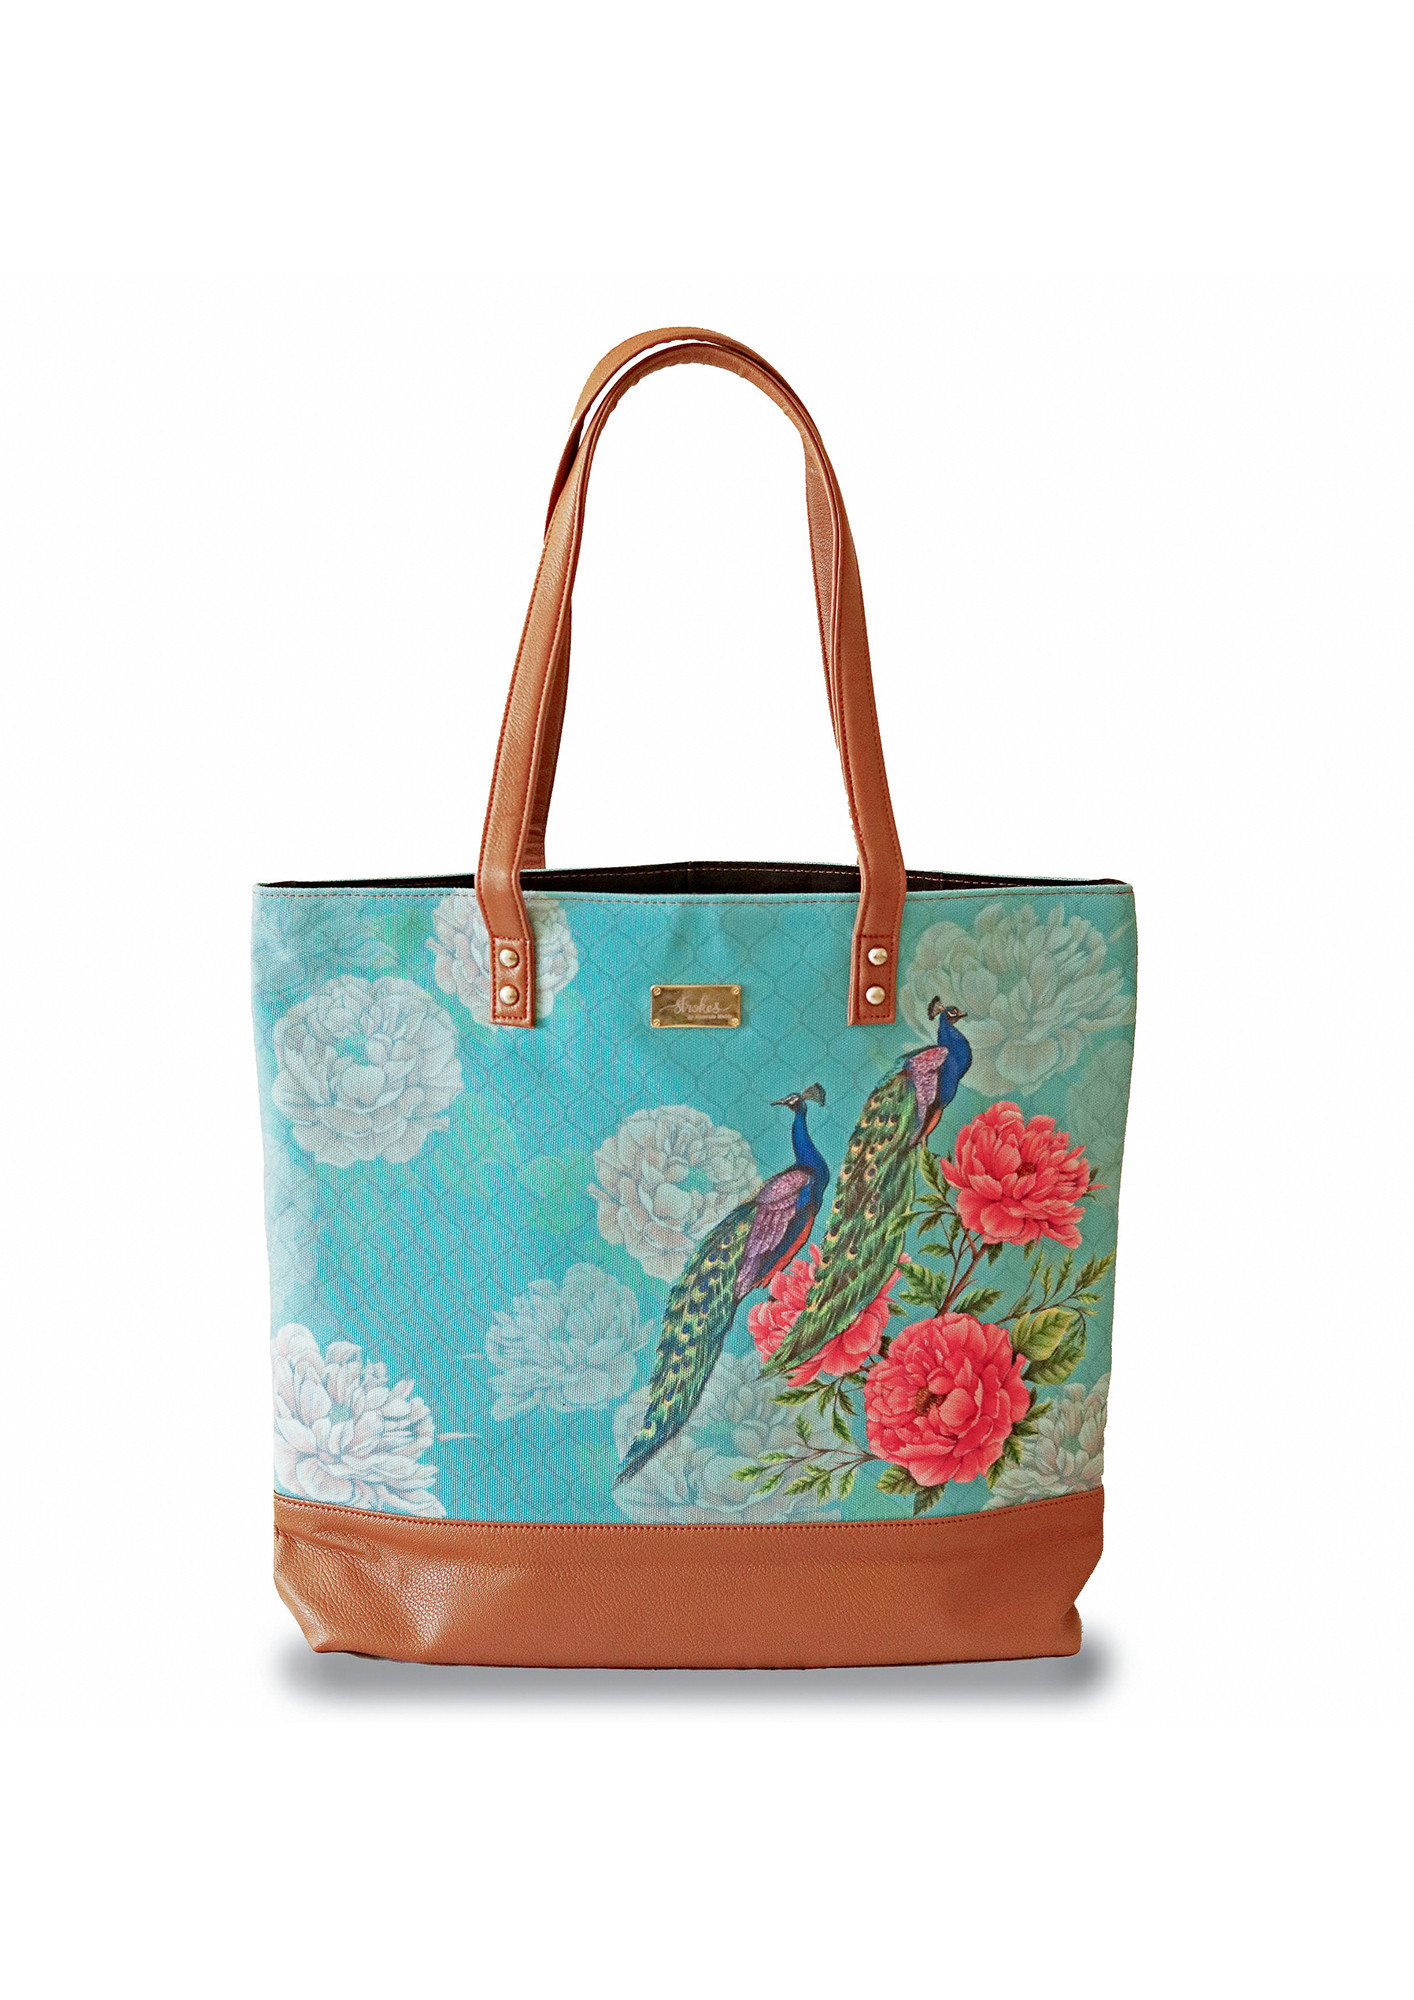 Strokes by Namrata Mehta Peacocks and Peonies Tote Bag For Women